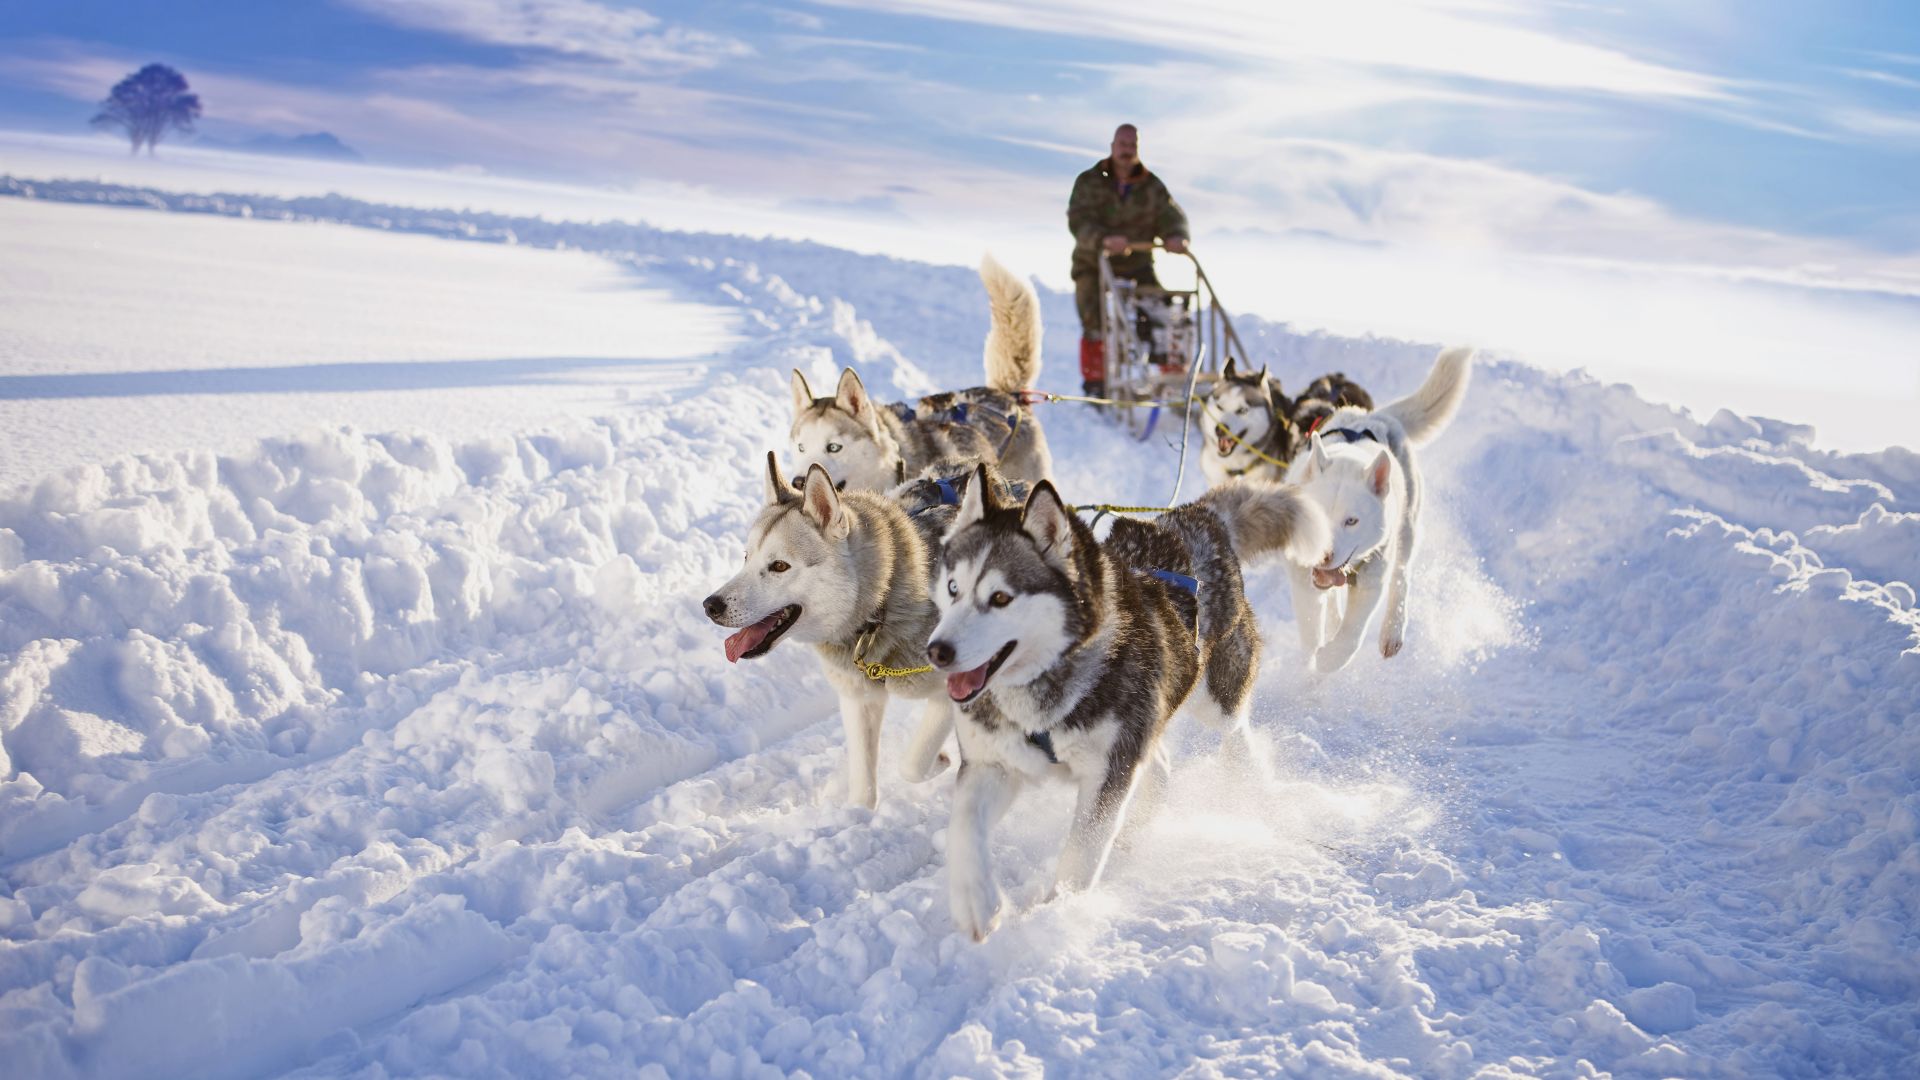 Dietramszell: Sledging with huskies